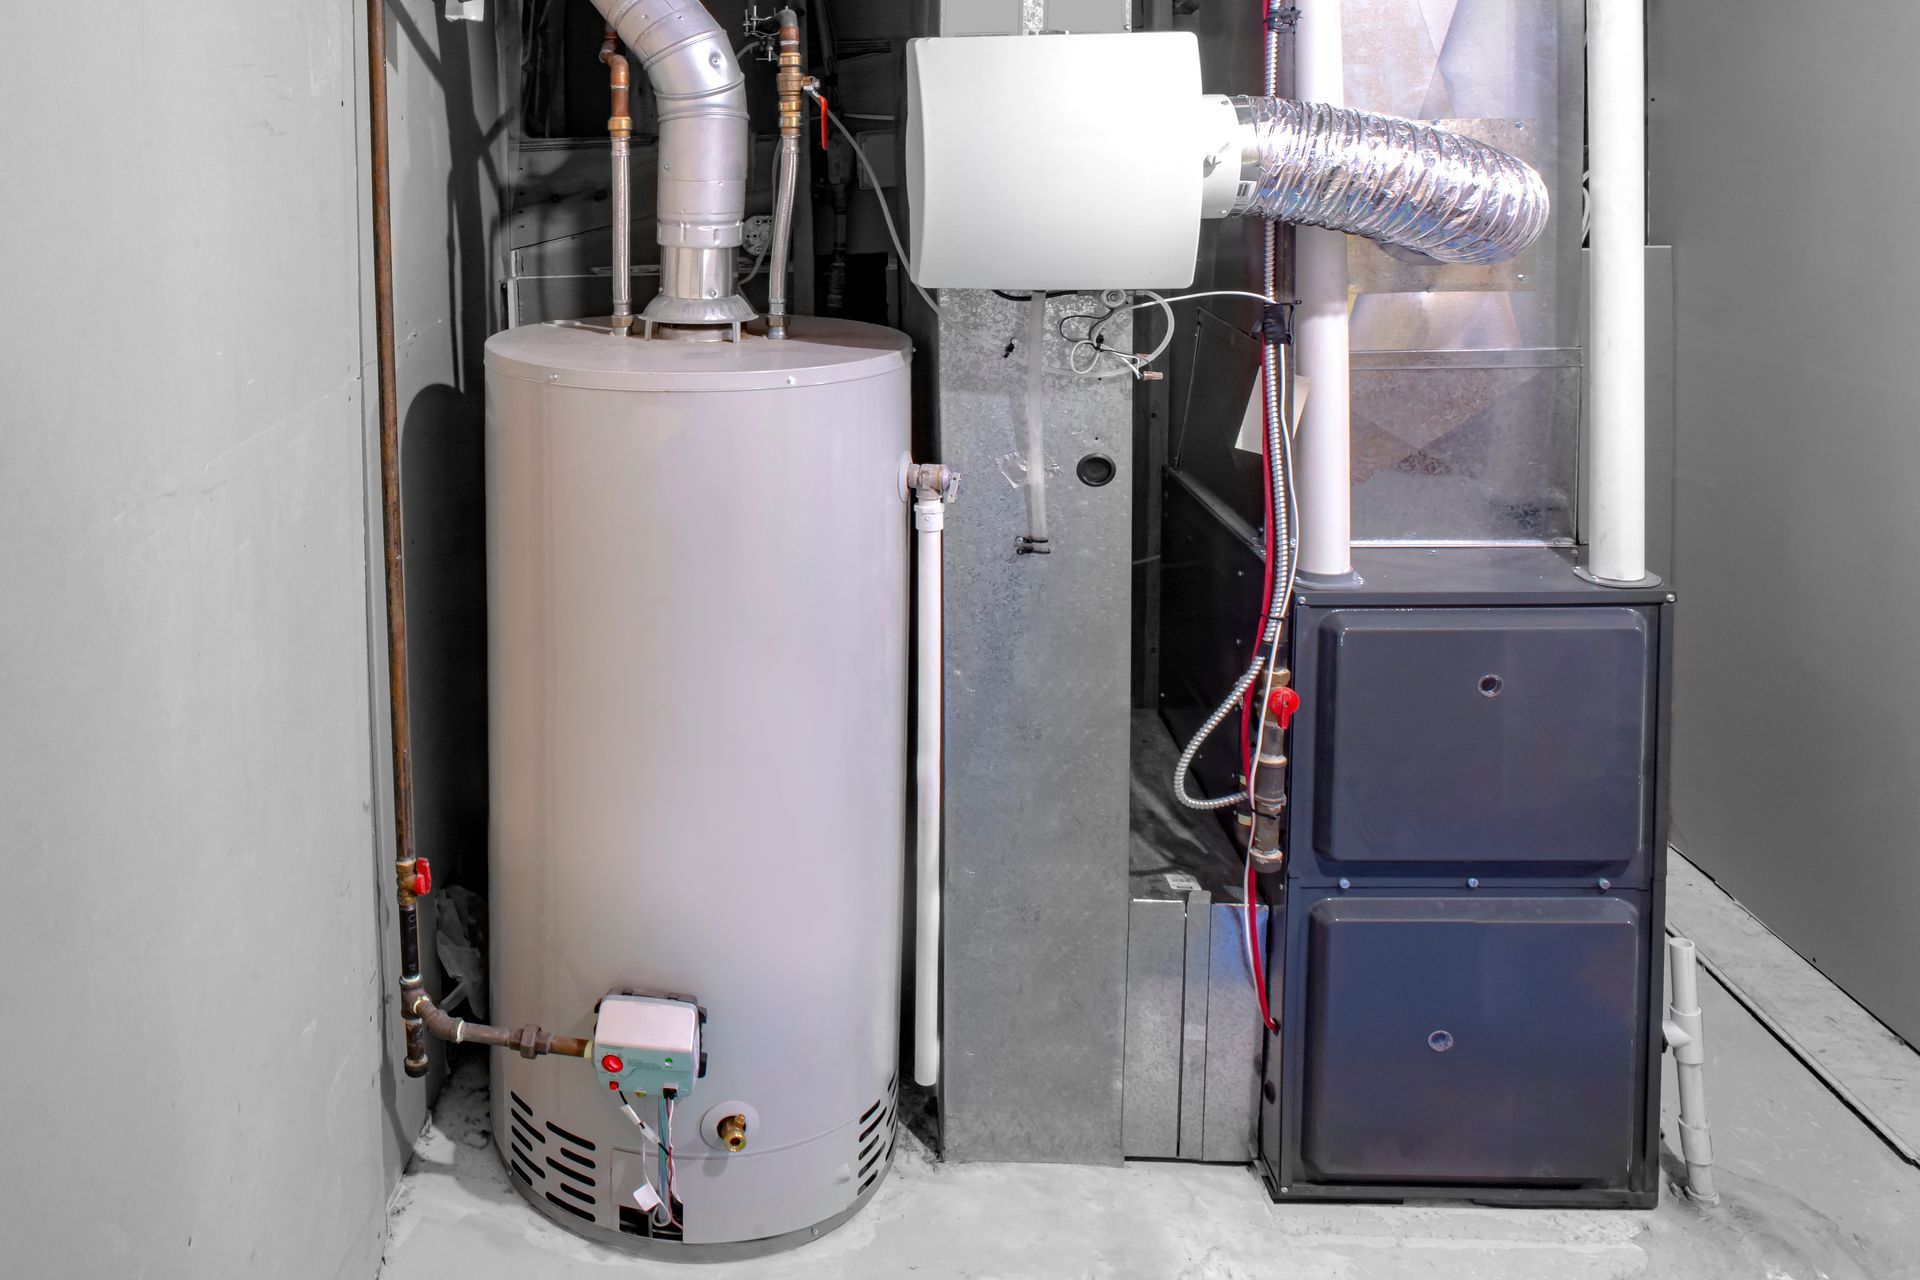 An energy-efficient home furnace with a gas water heater and humidifier installed in a residential setting.